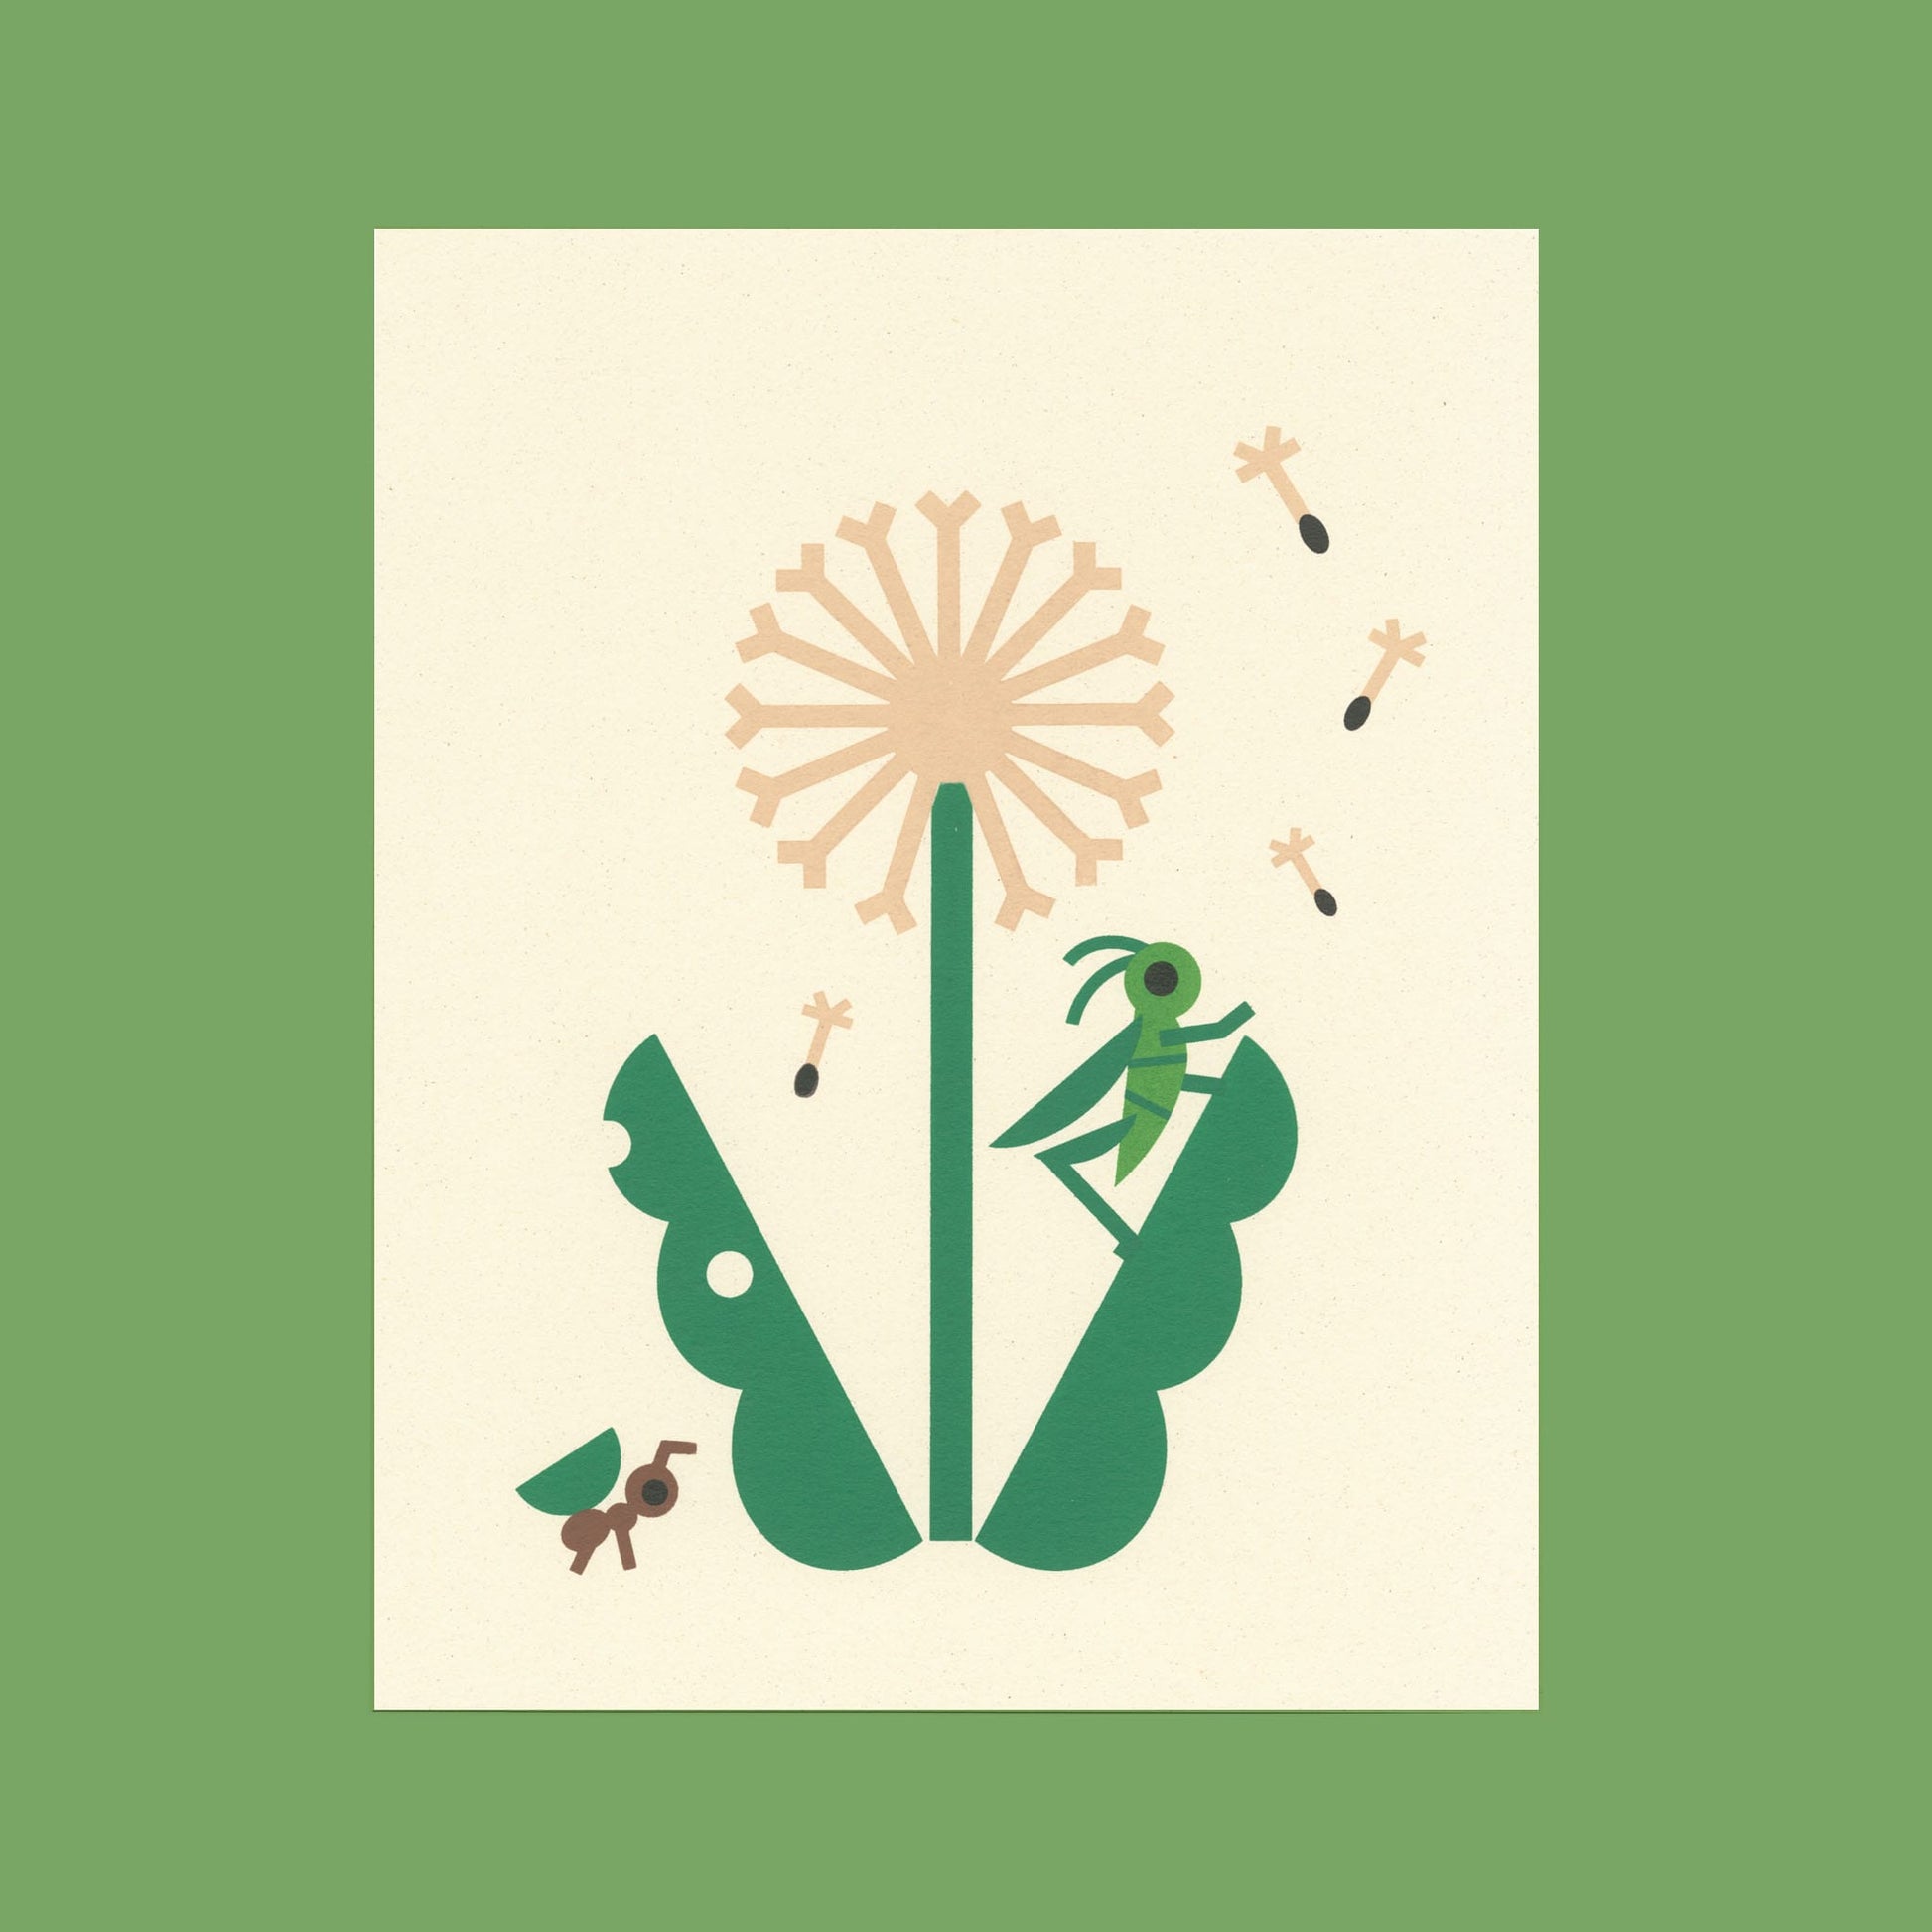 Bugs graphic art print featuring ants, cricket and a dandelion artwork placed on a green background.